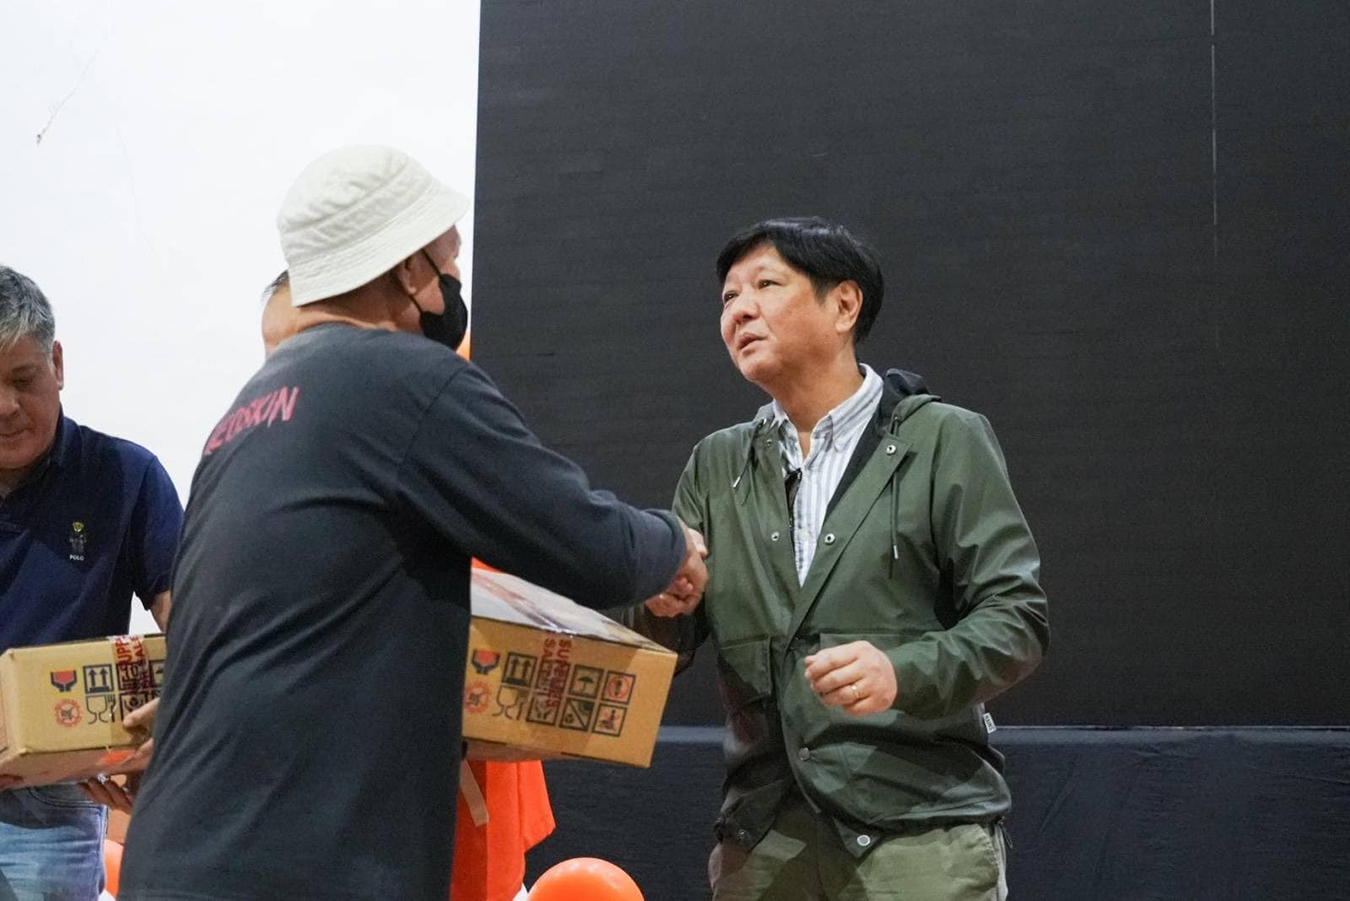 President Ferdinand R. Marcos Jr. on Wednesday visited areas battered by torrential rains in Misamis Occidental and led the distribution of some P16.04 million worth of assistance to affected families in the province.